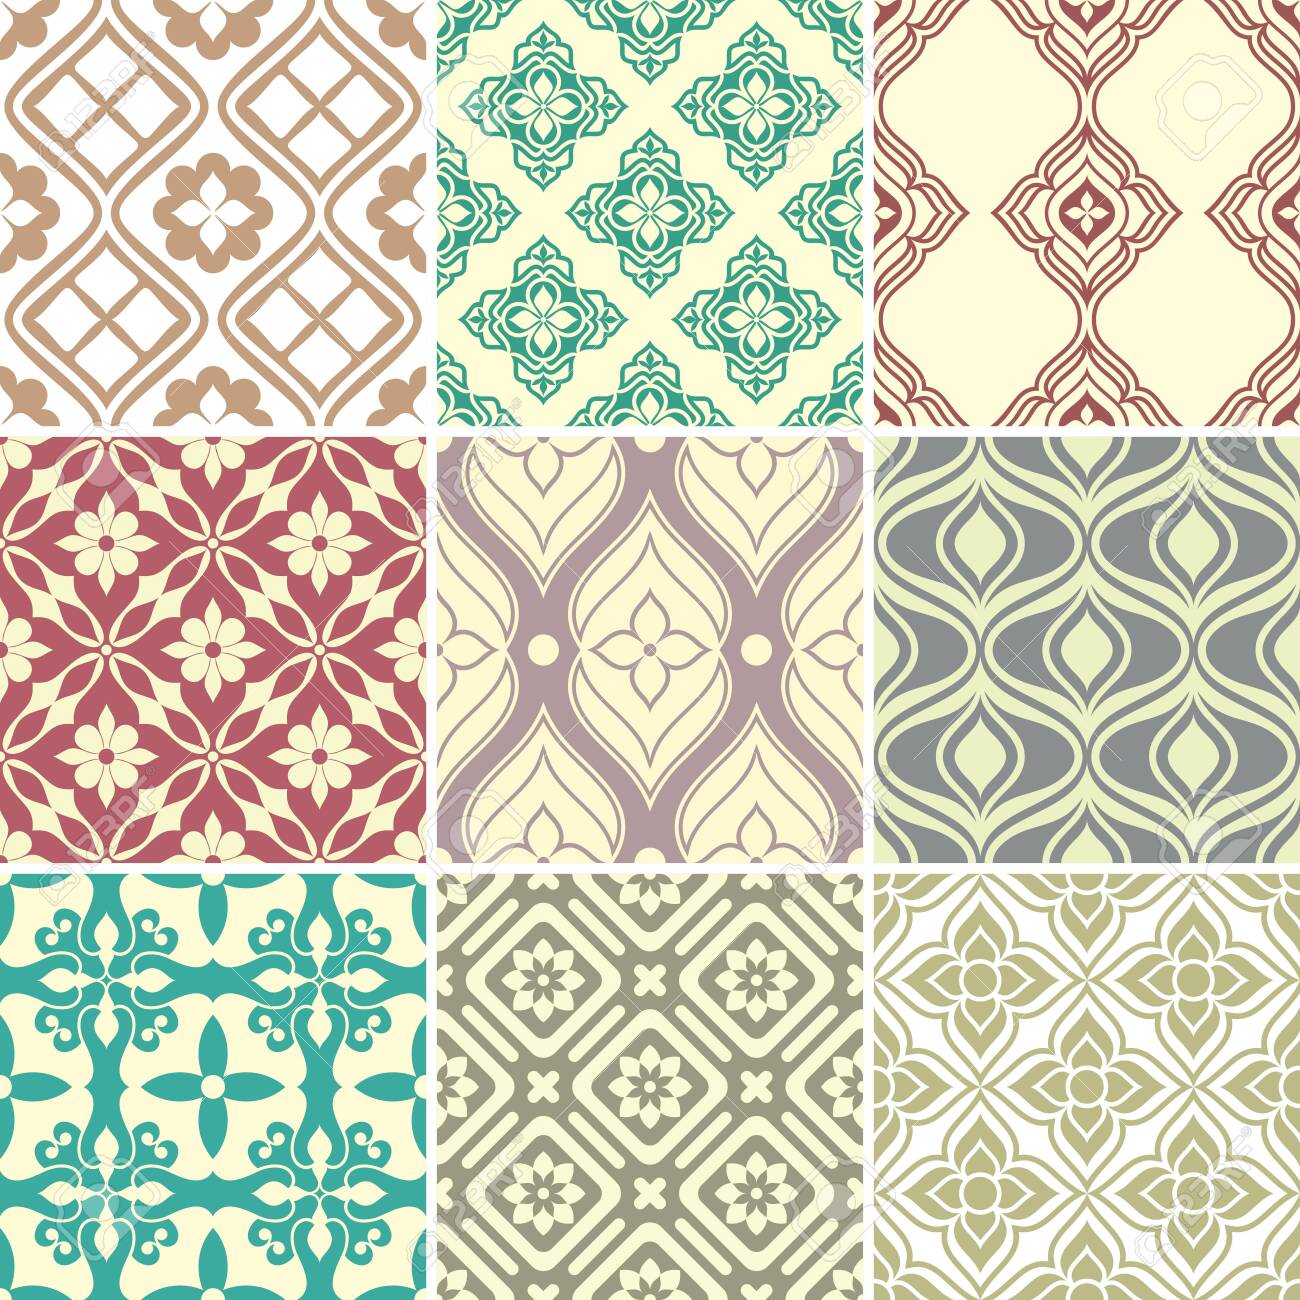 Retro Seamless Wallpaper Patterns Vintage Background With